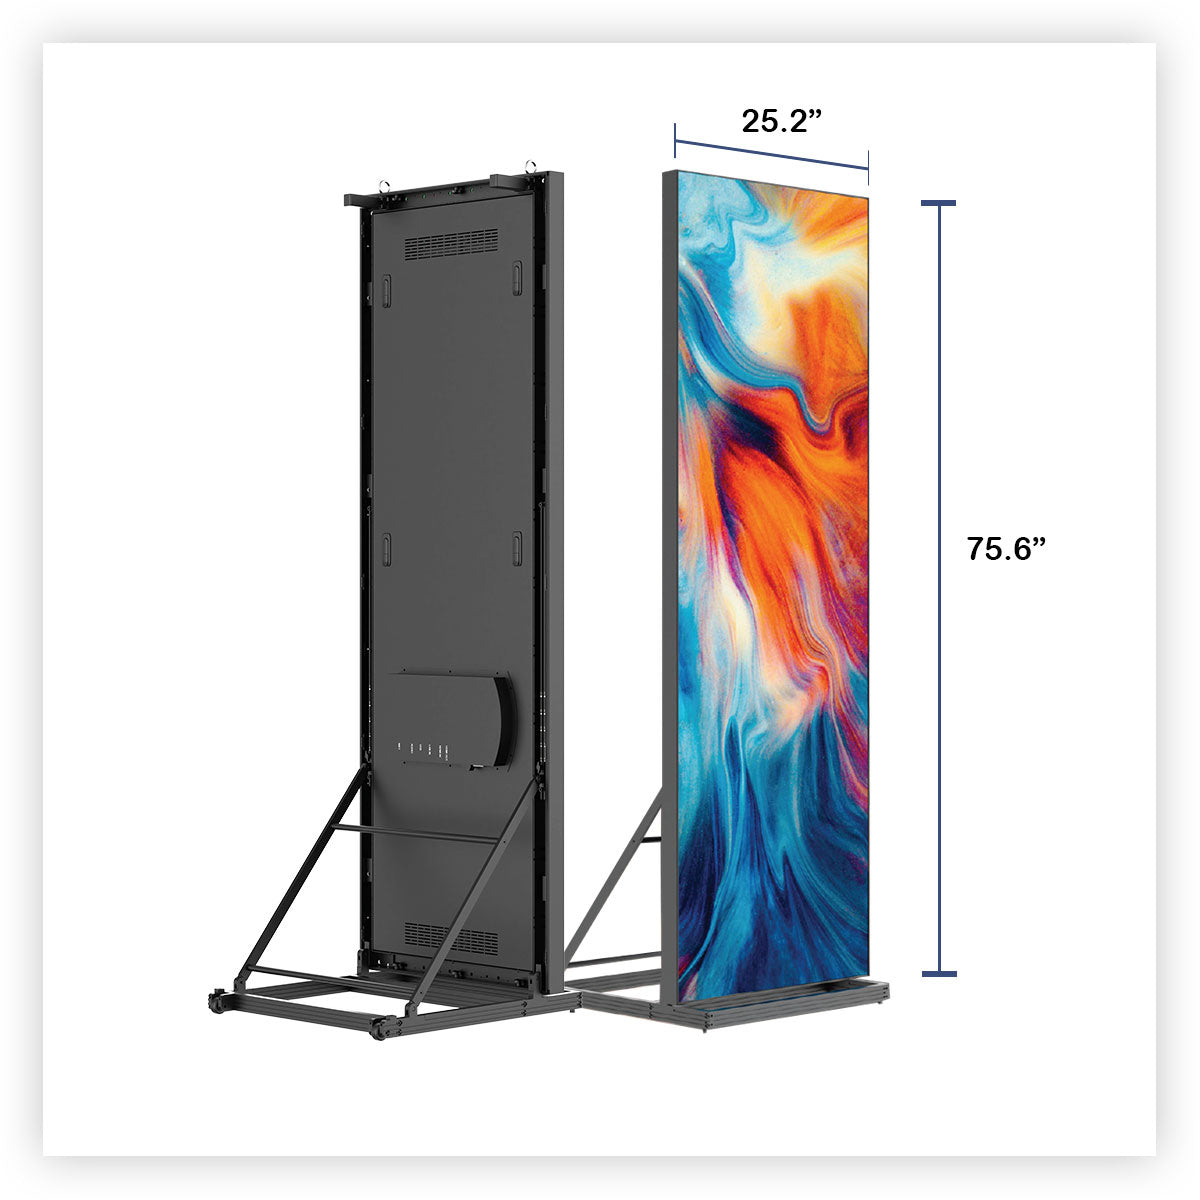 AdSpire Outdoor LED Poster 25.2"x75.6" P2.5mm